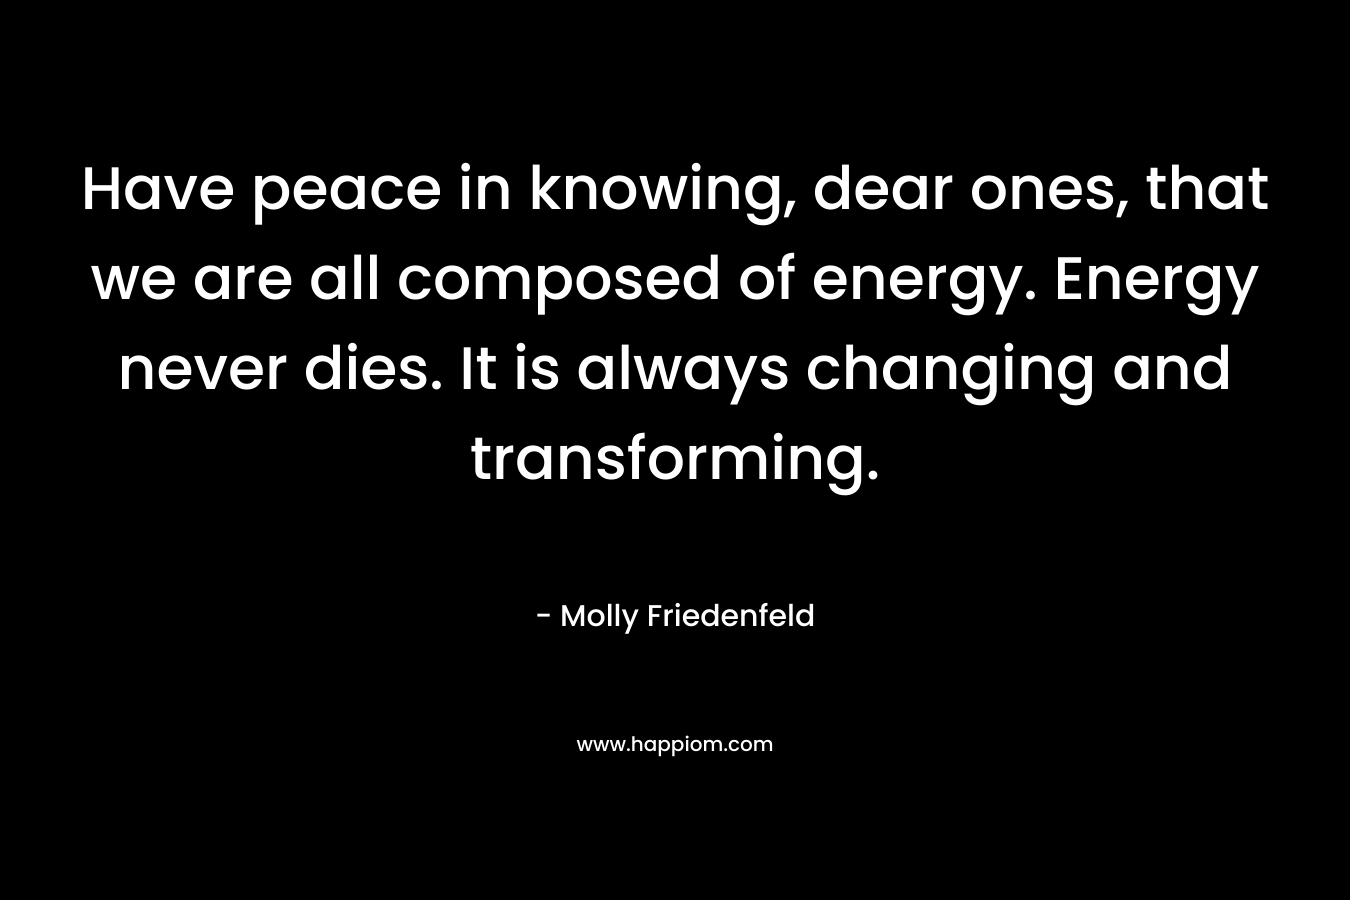 Have peace in knowing, dear ones, that we are all composed of energy. Energy never dies. It is always changing and transforming. – Molly Friedenfeld